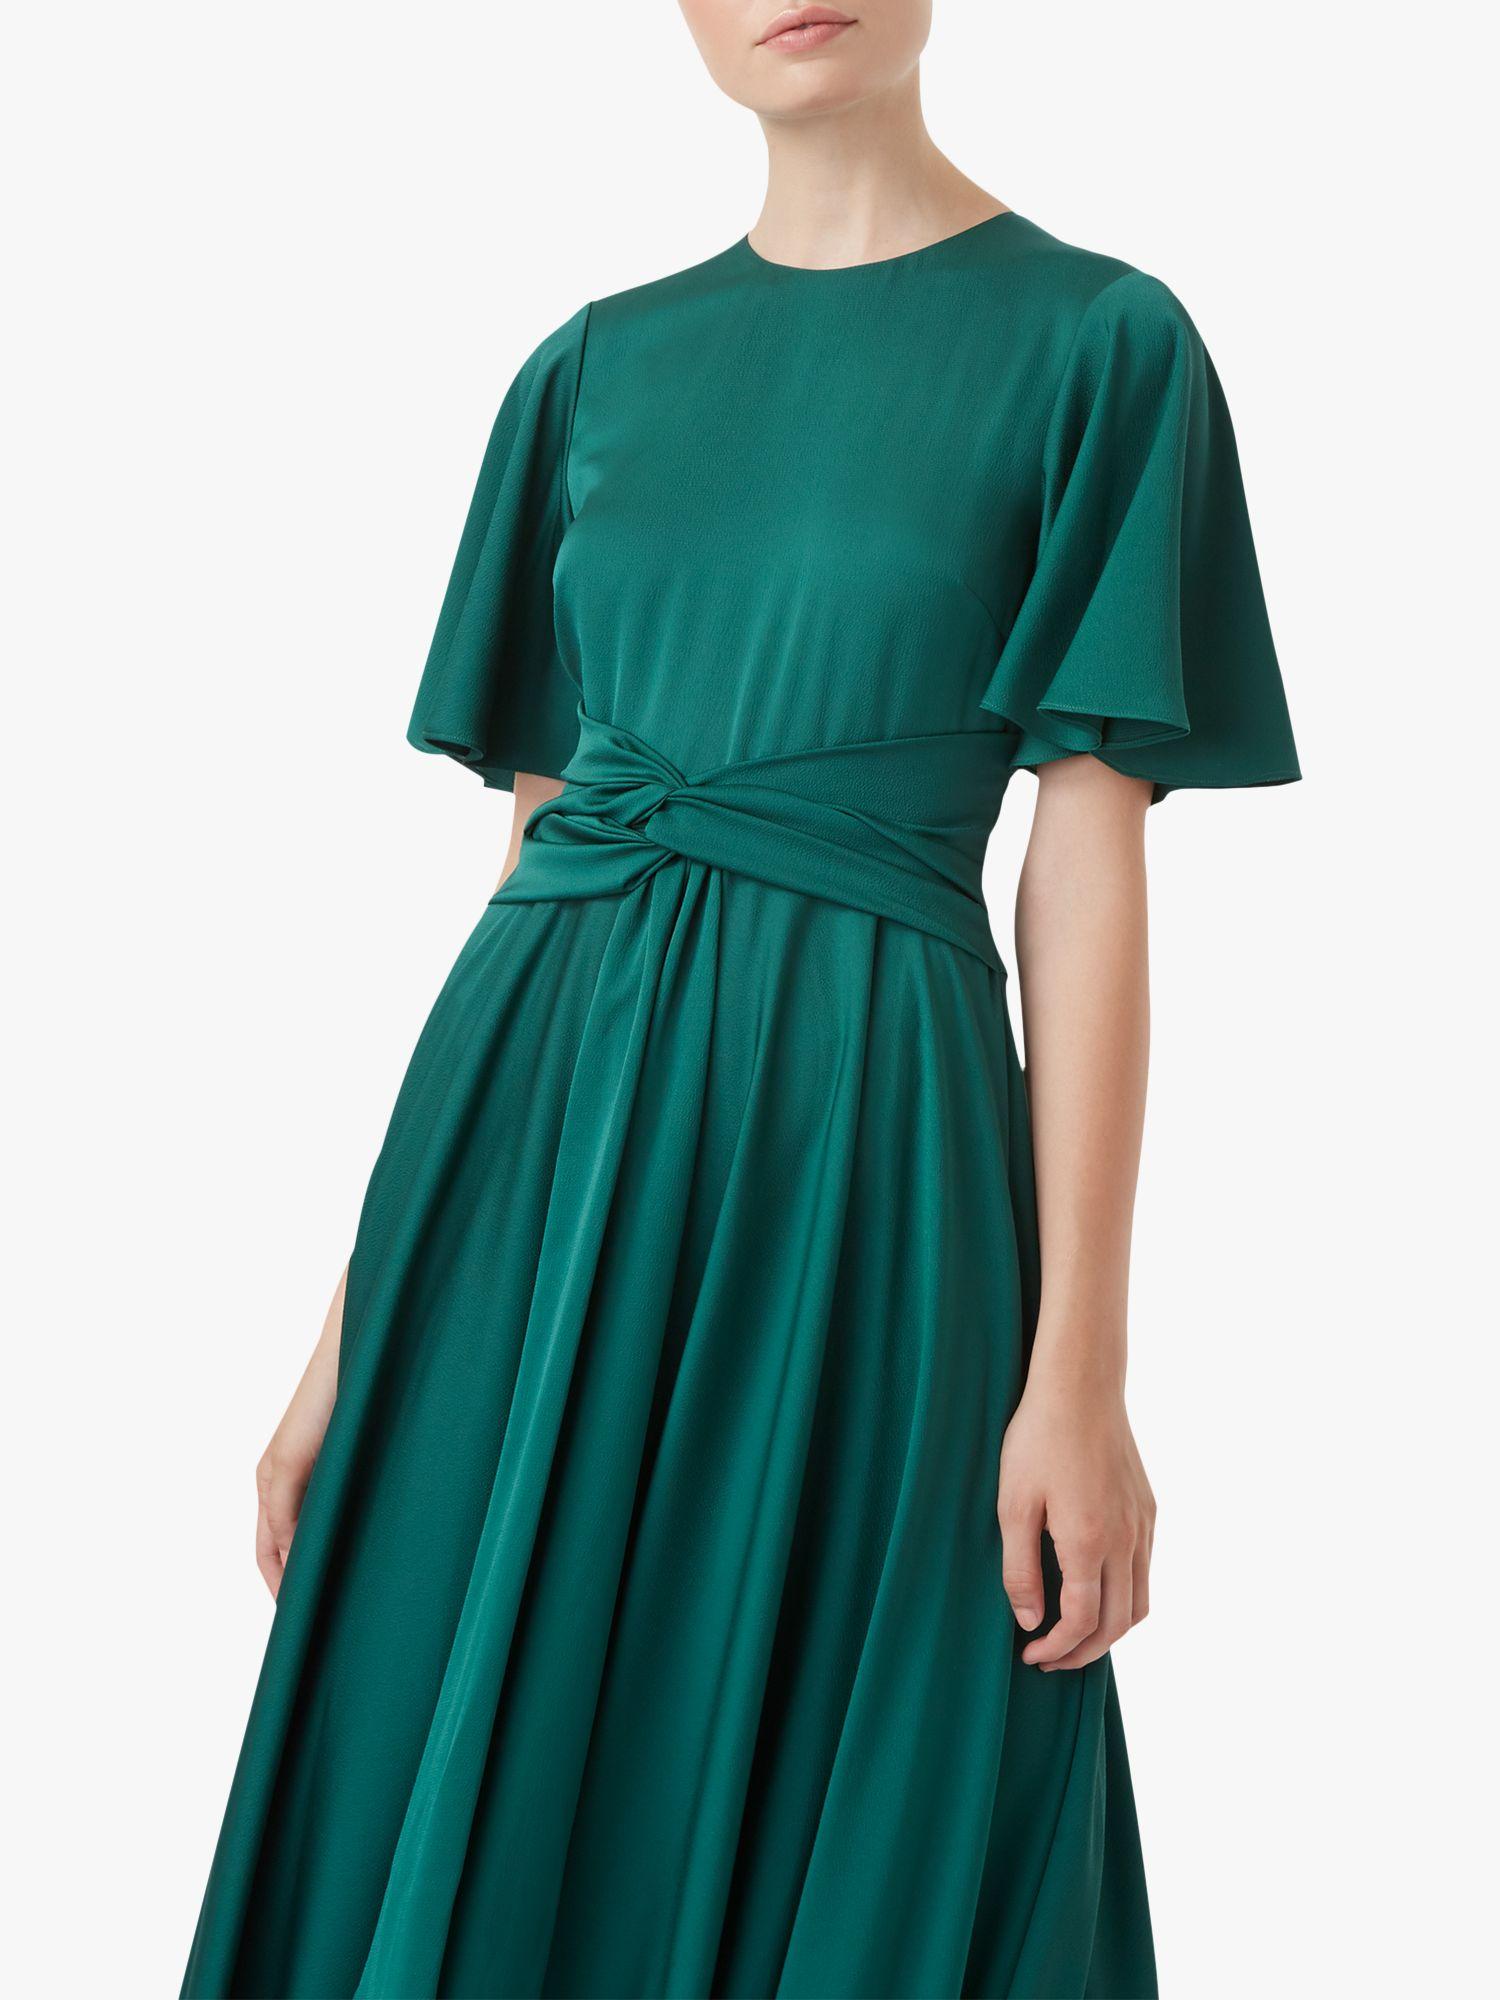 Hobbs Synthetic 'leia' Fit & Flare Dress in Emerald Green (Green) - Lyst